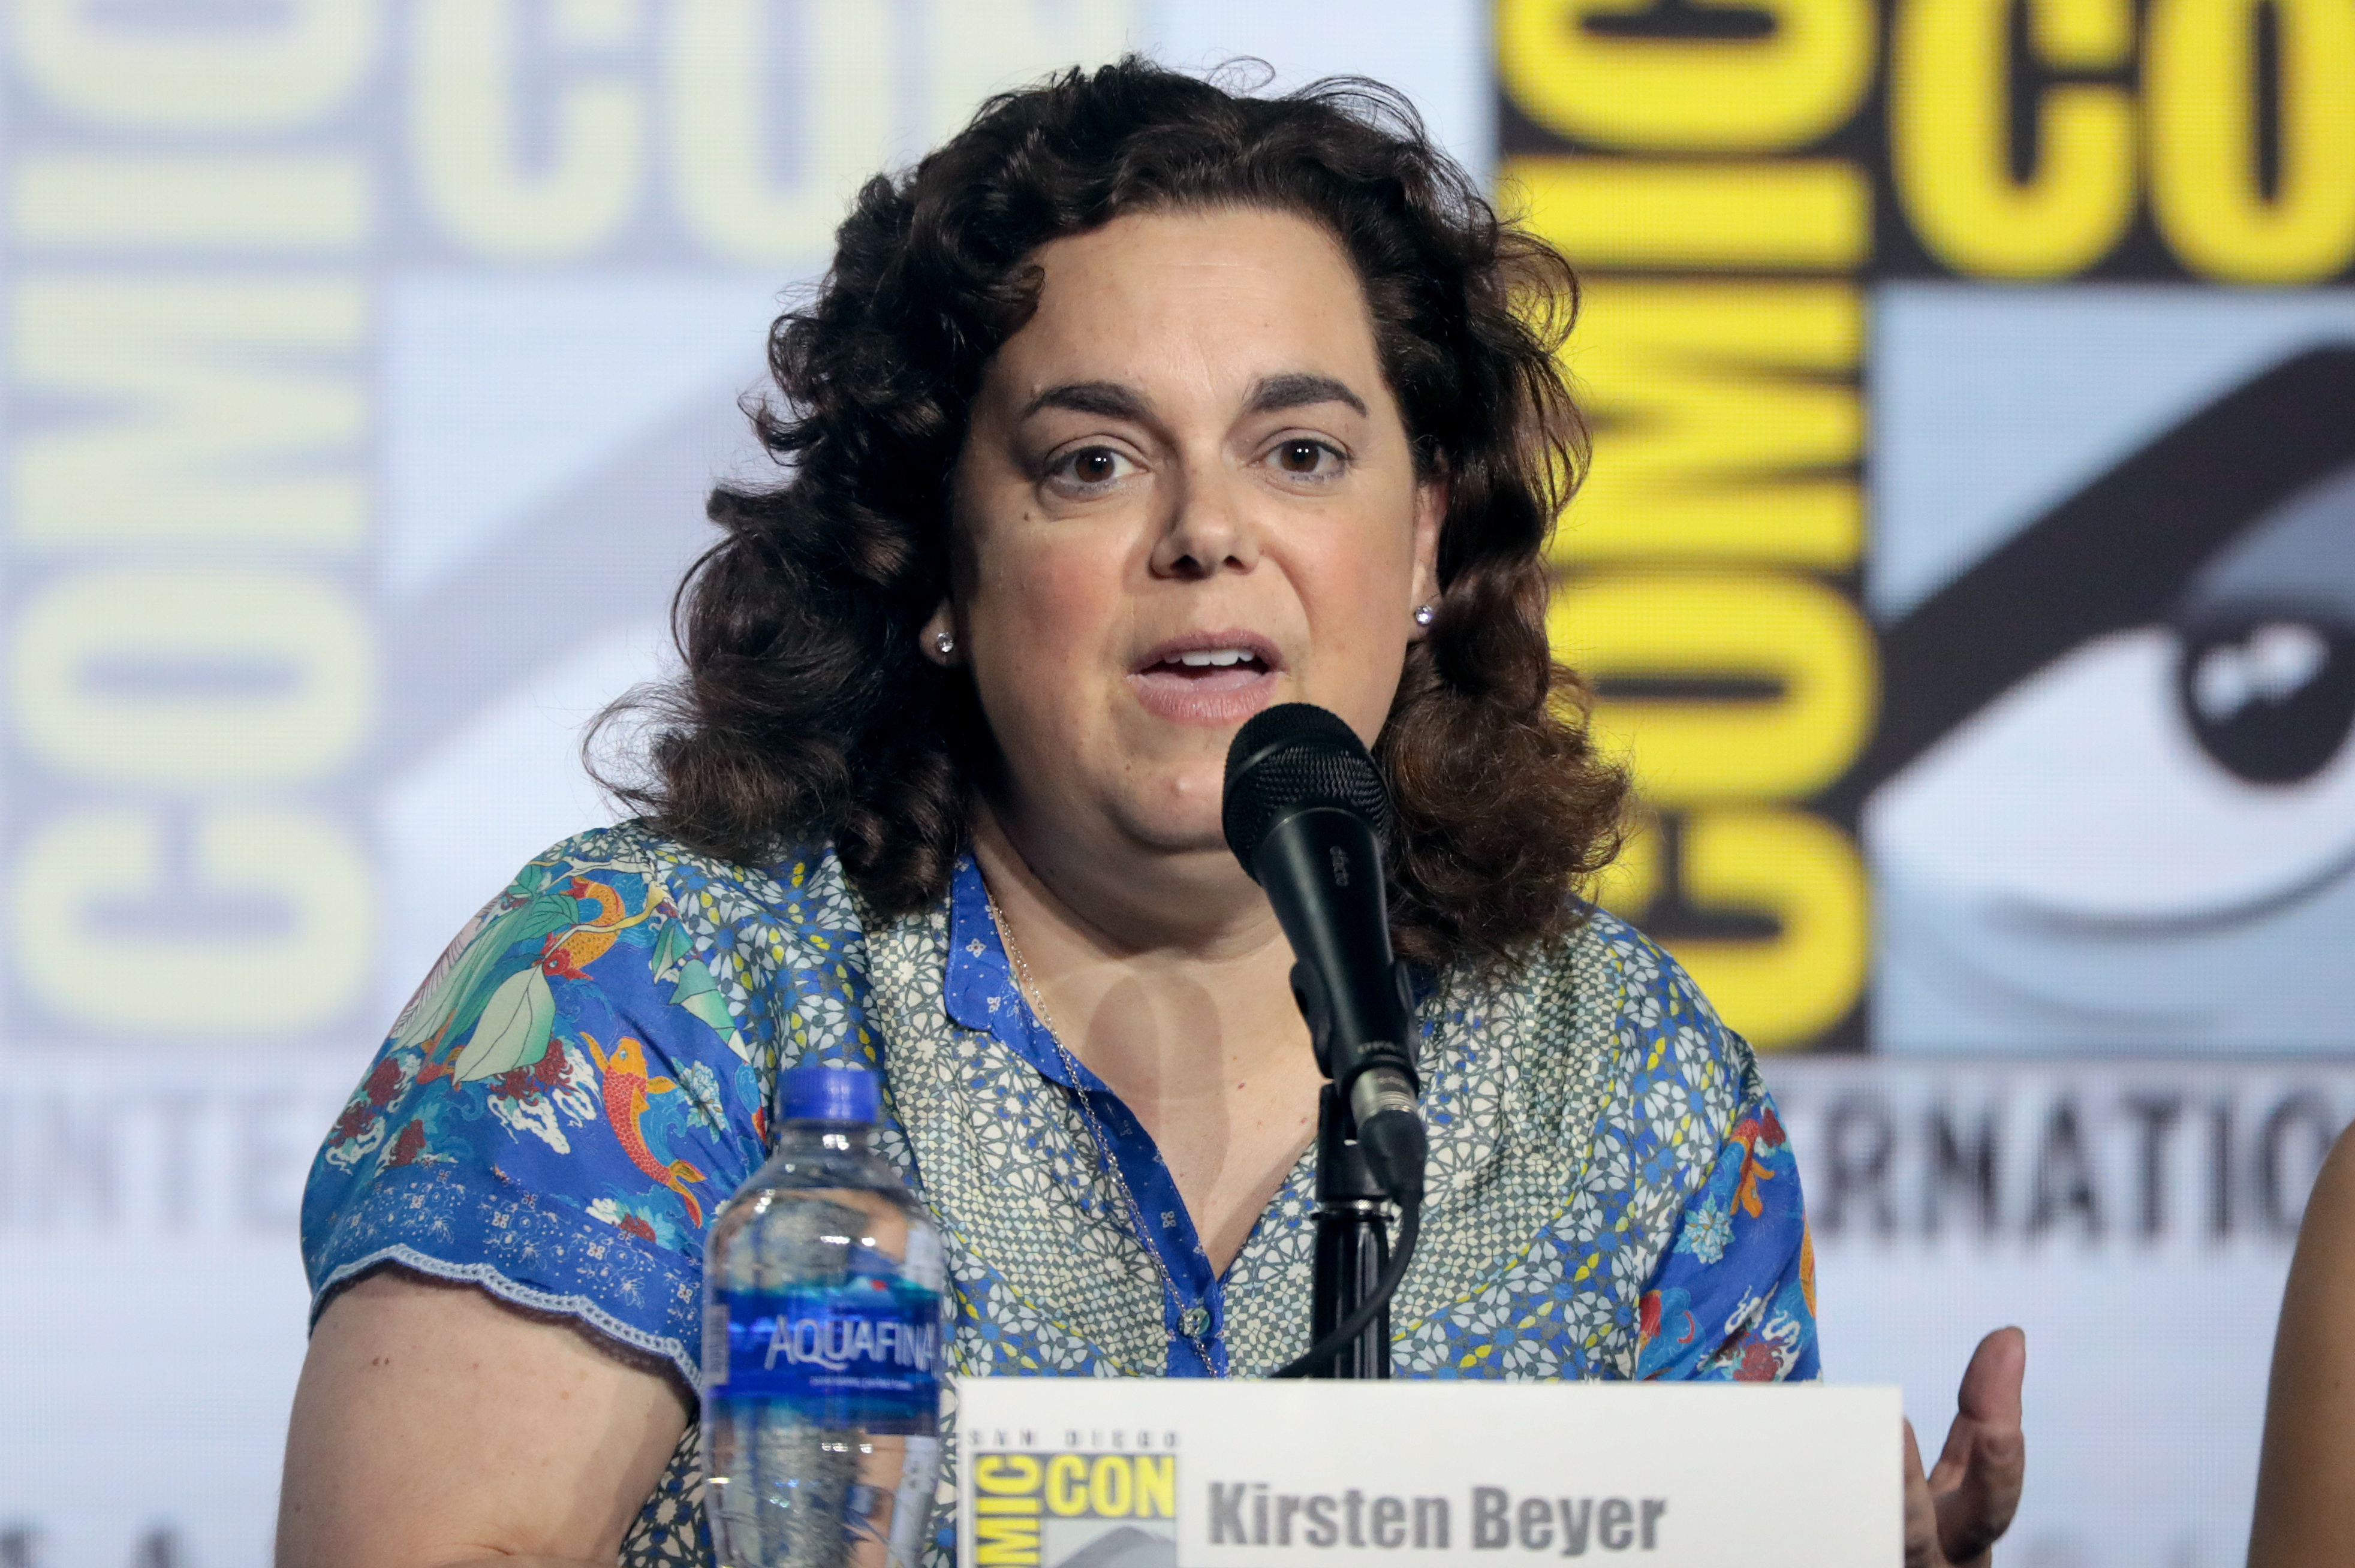 Kirsten Beyer at the 2019 [[San Diego Comic Con]]